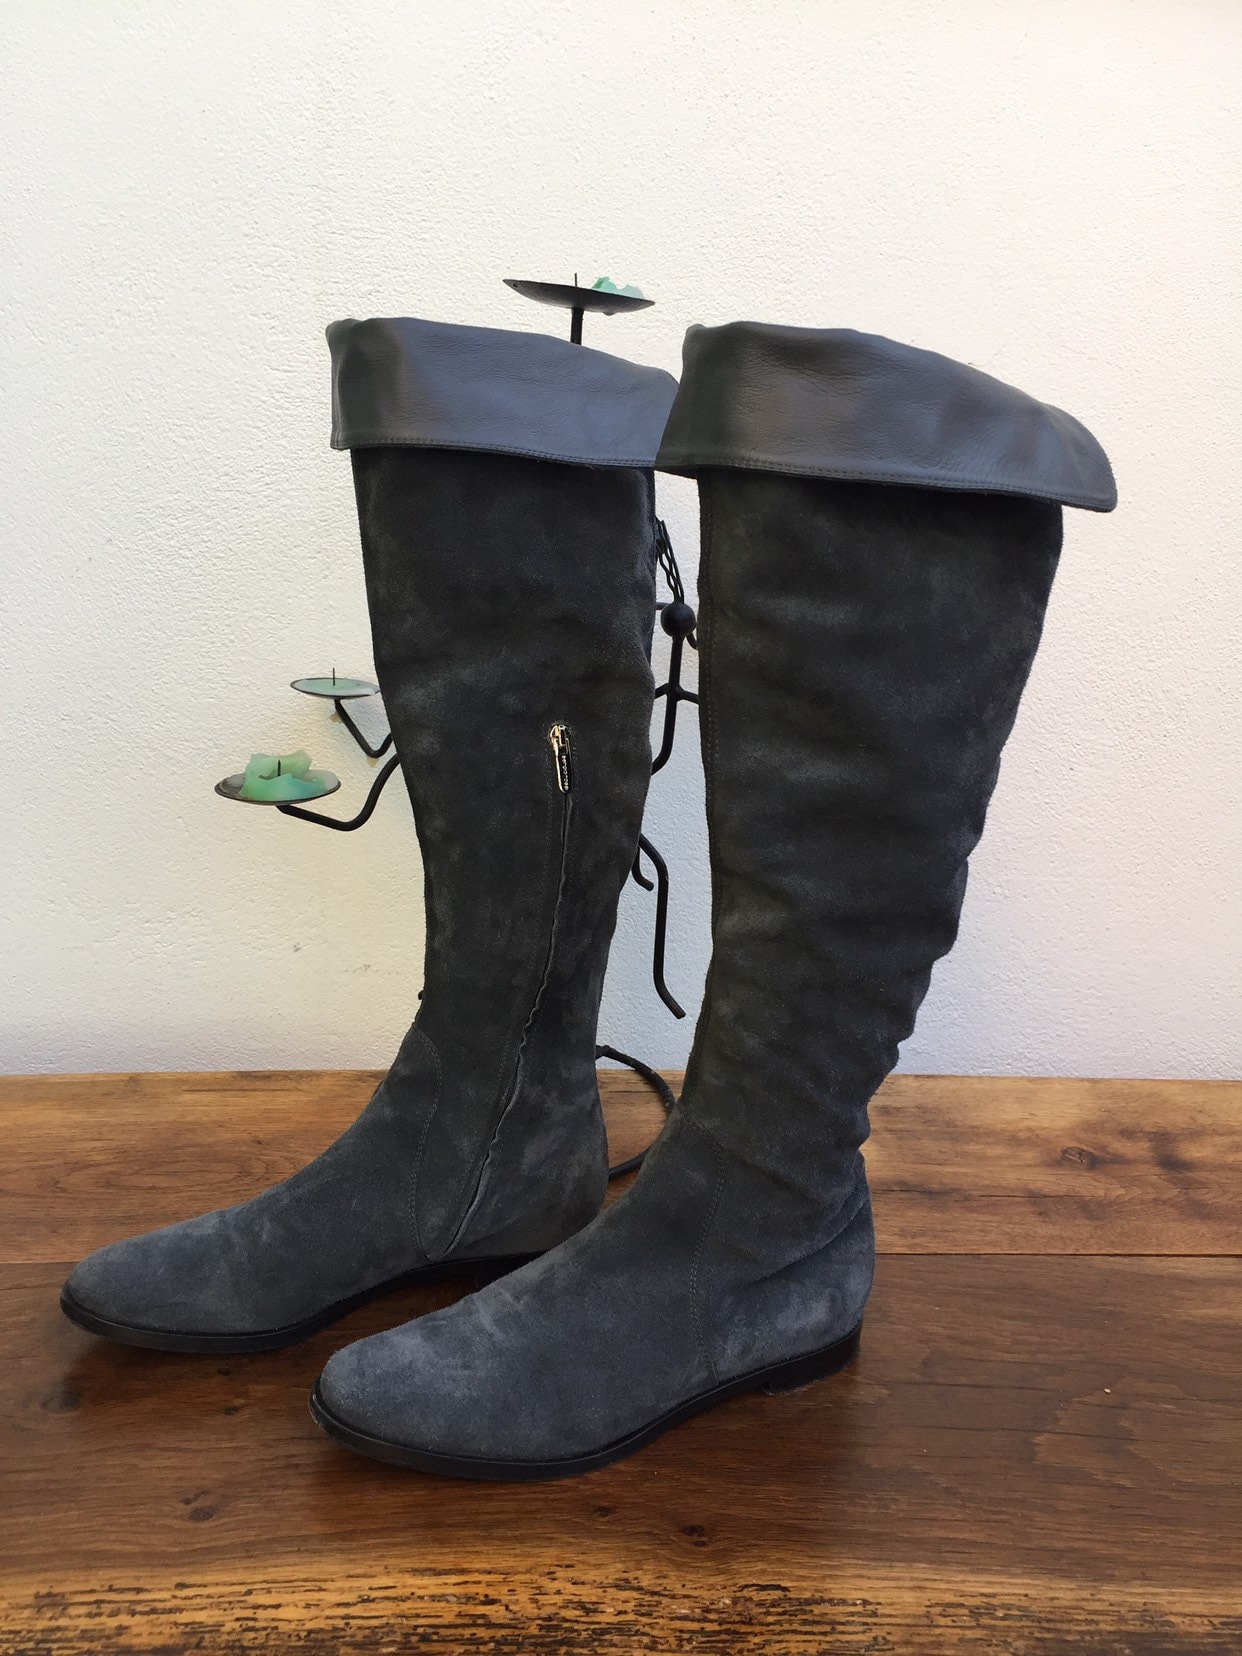 Sergio Rossi Boots - Etsy